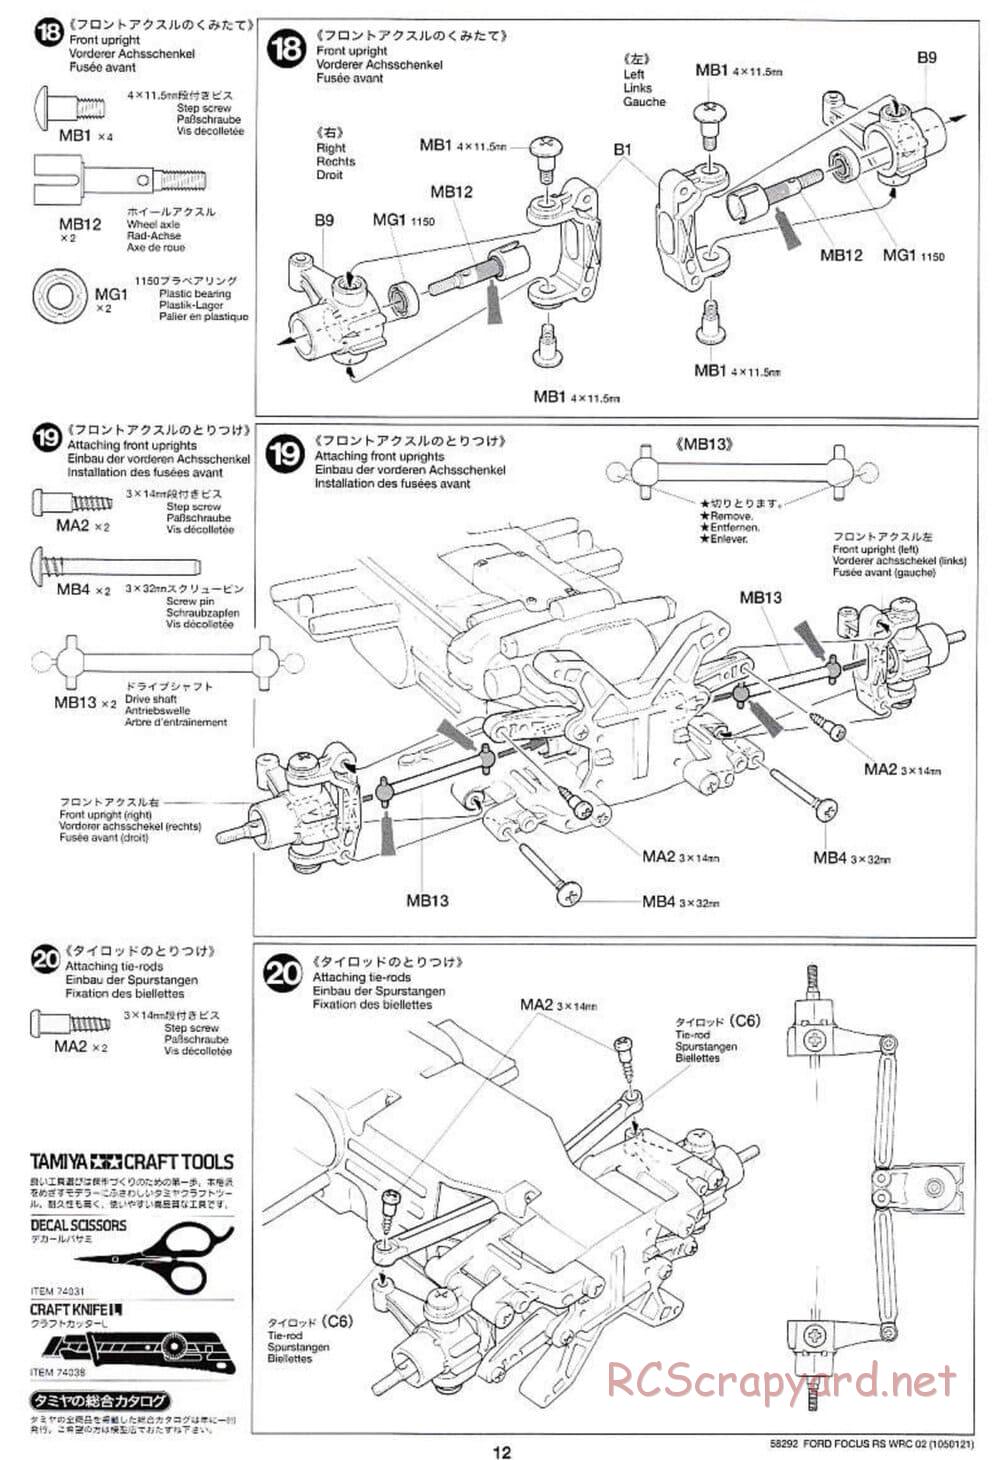 Tamiya - Ford Focus RS WRC 02 - TL-01 Chassis - Manual - Page 12